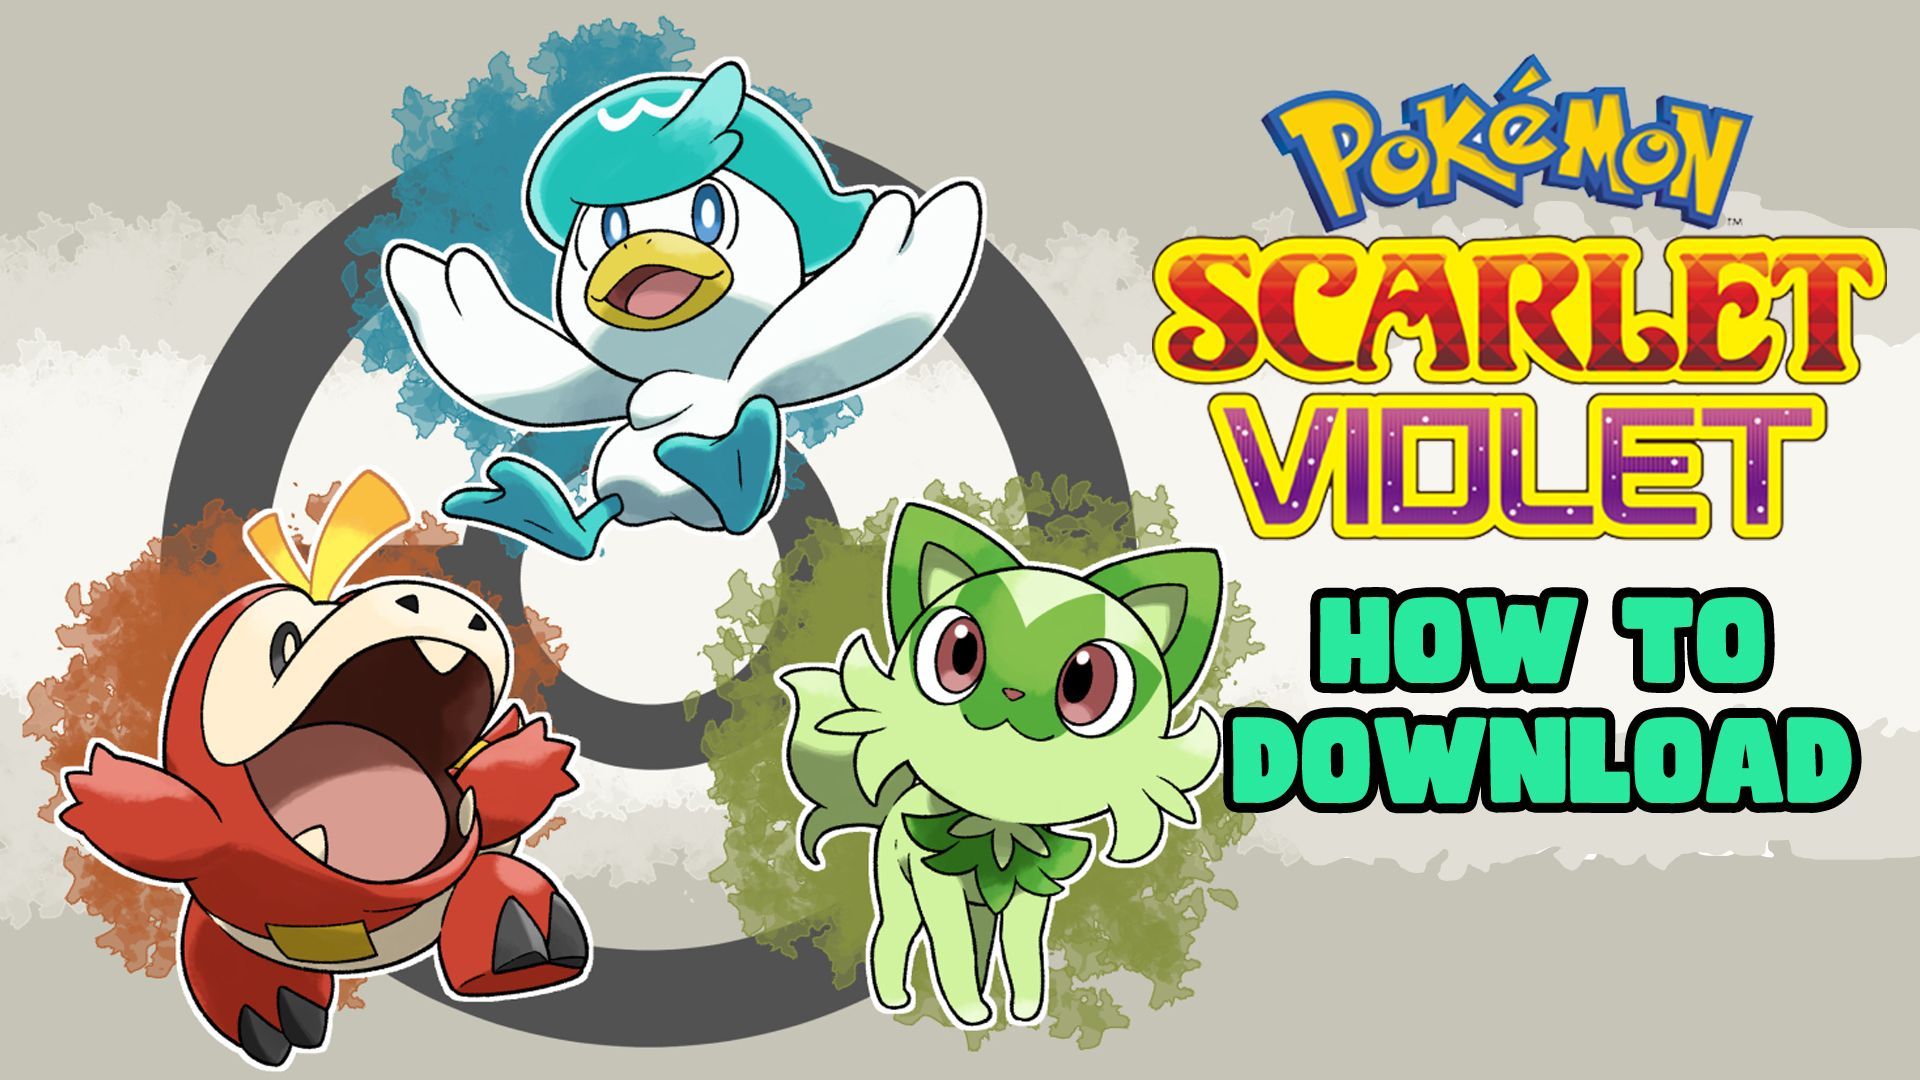 How To Play Pokemon Scarlet and Violet on PC